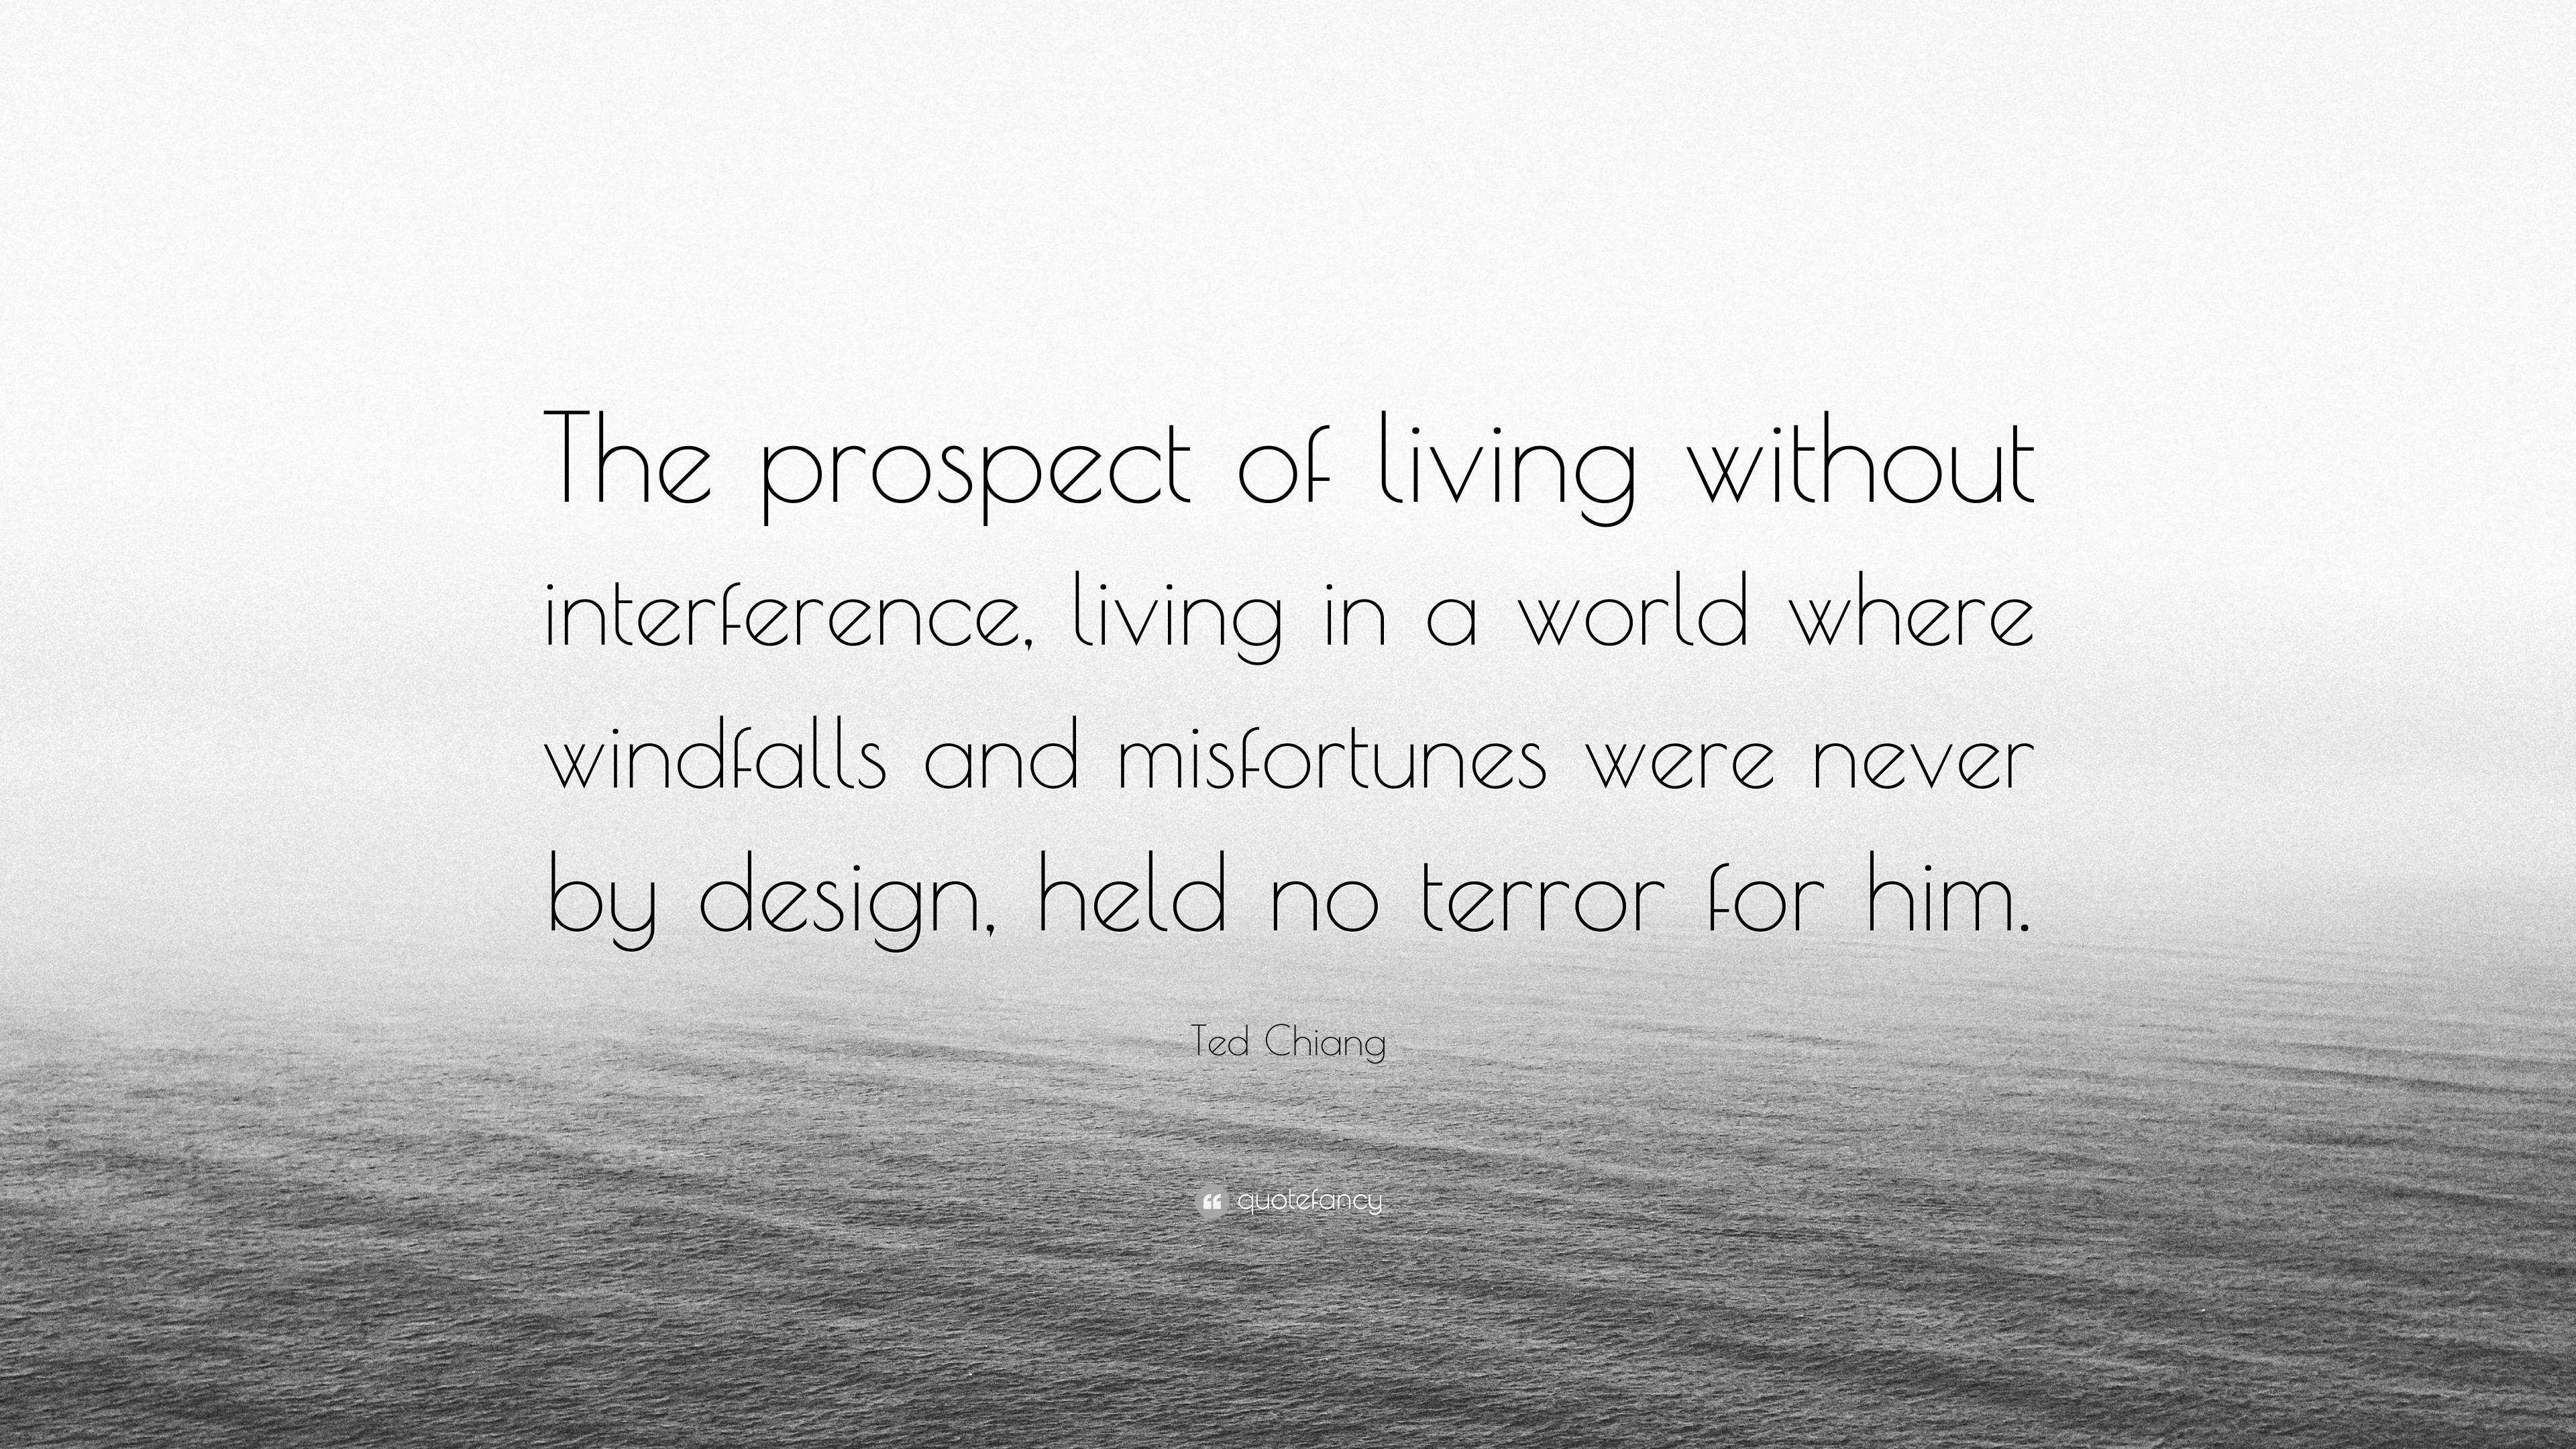 Ted Chiang Quote: “The prospect of living without interference, living ...